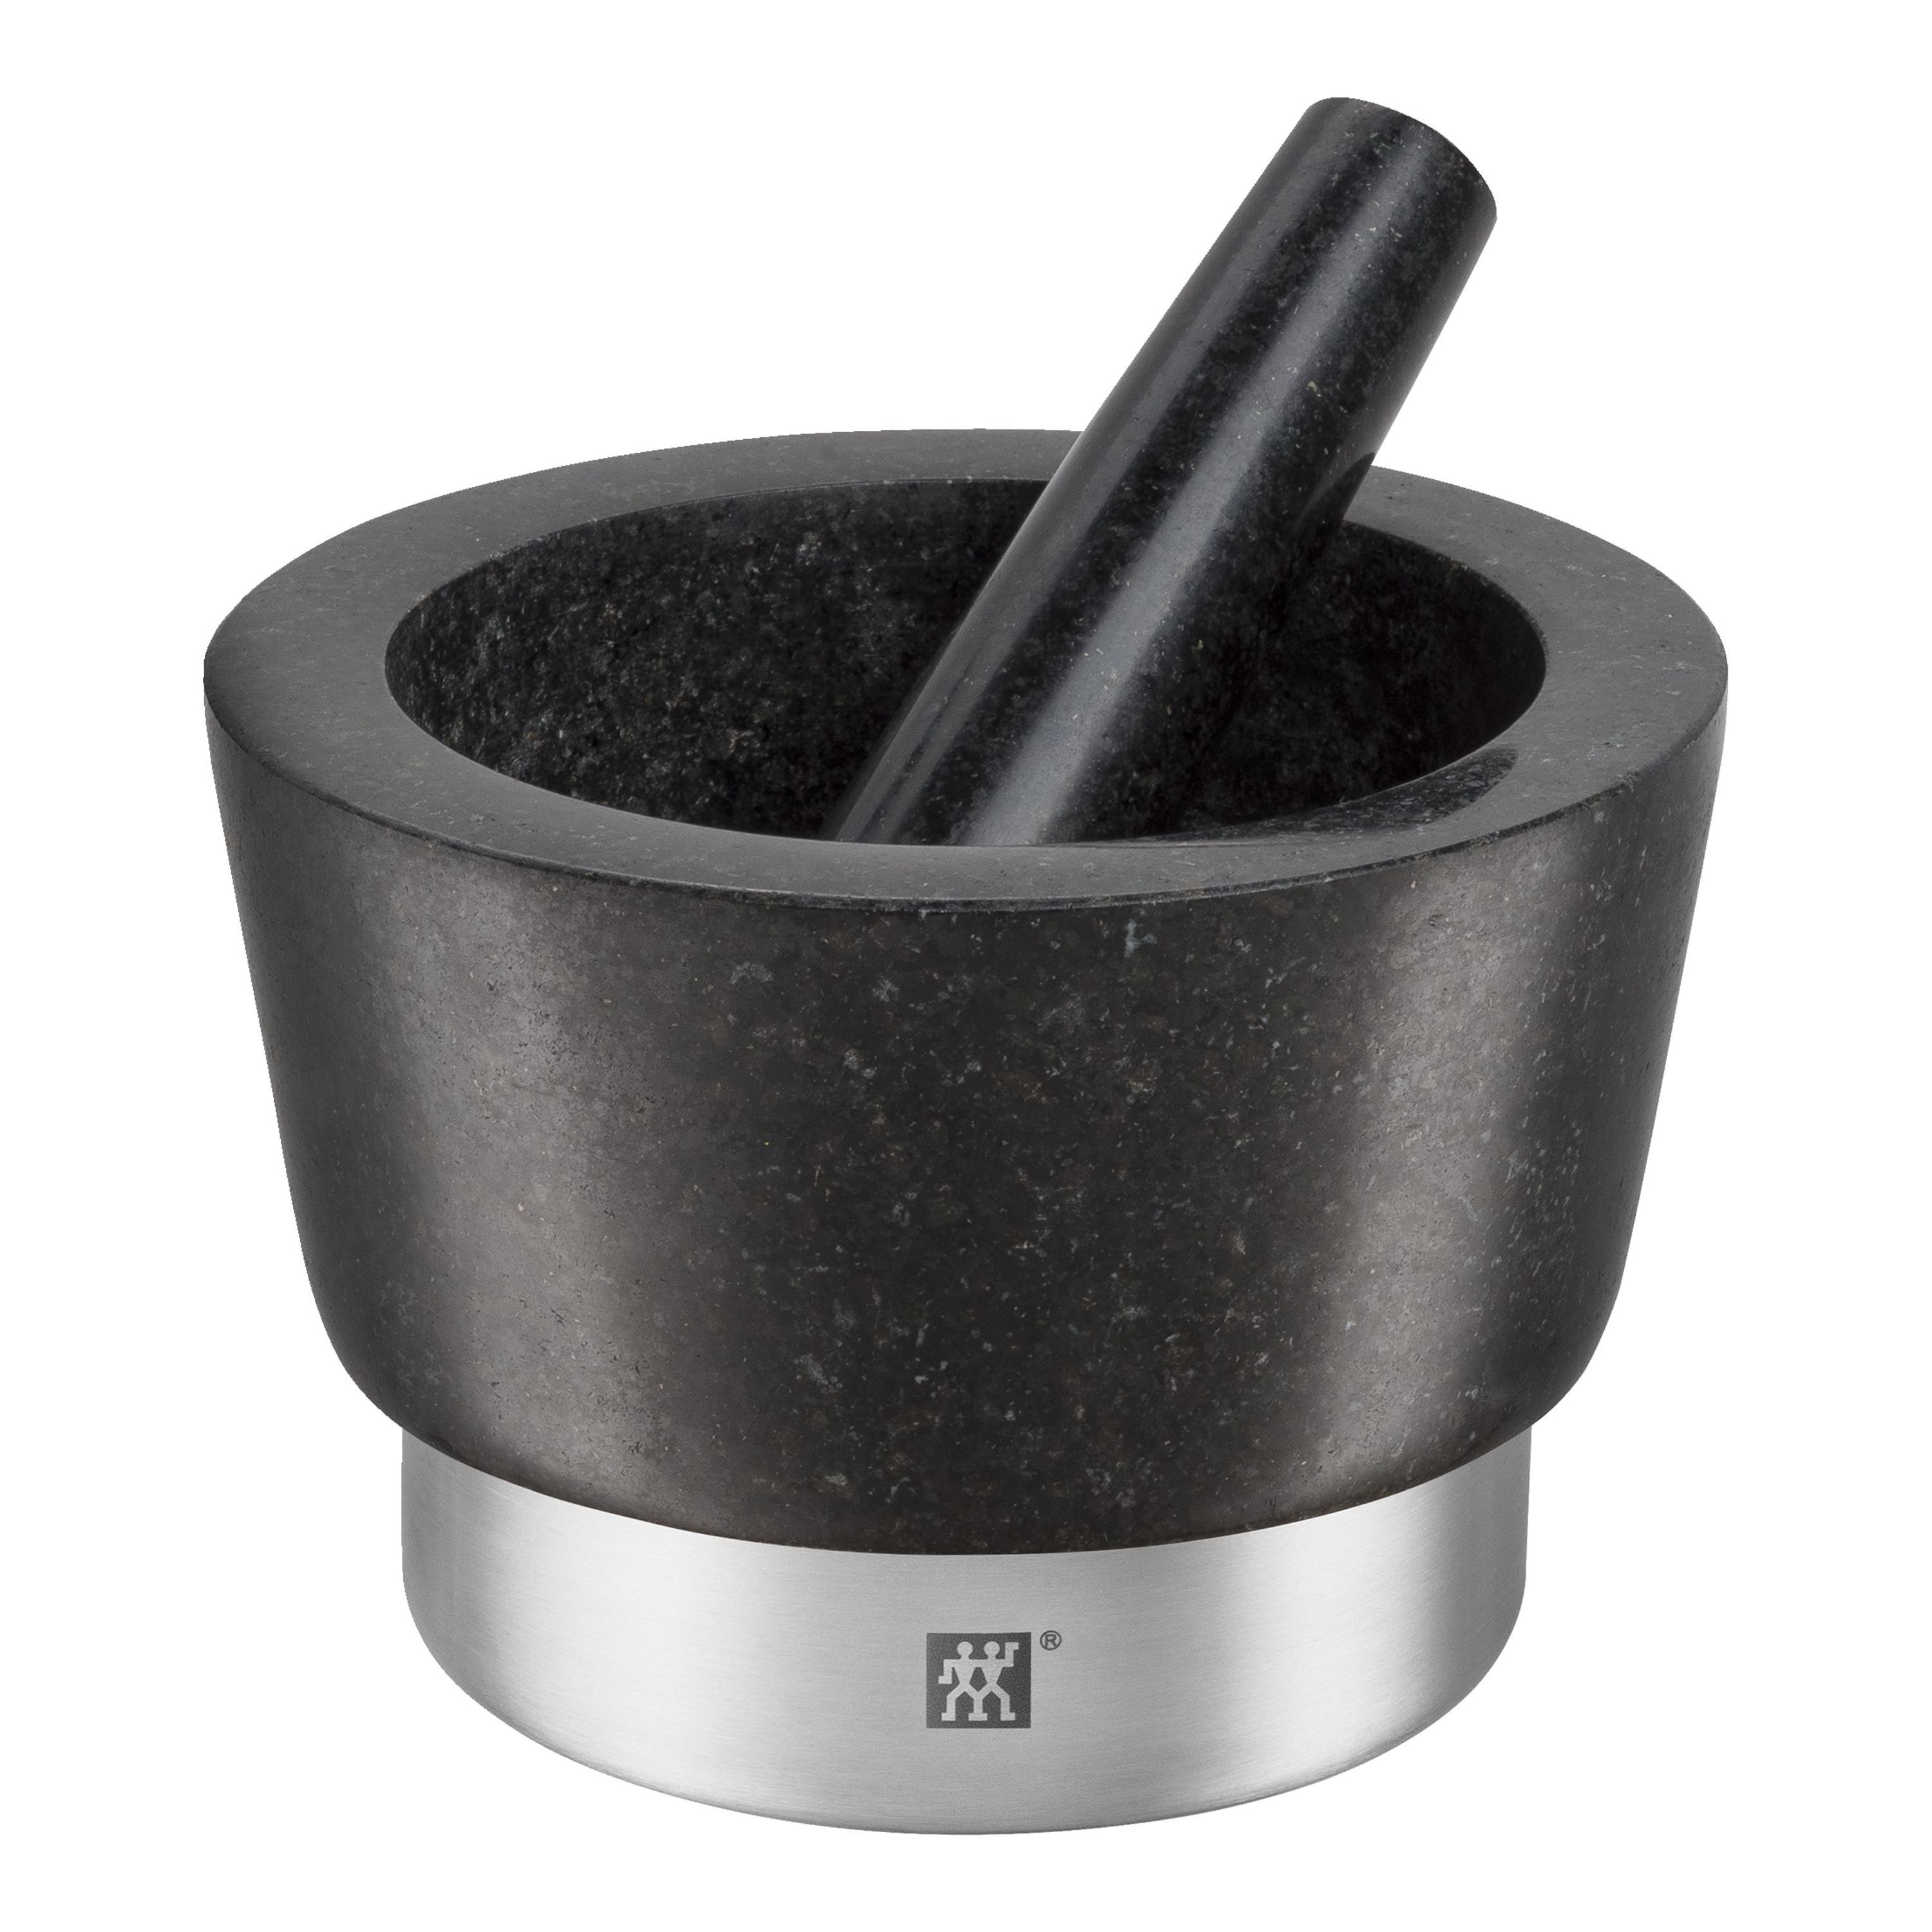 ZWILLING Spices Mortier, 15 cm, Granit